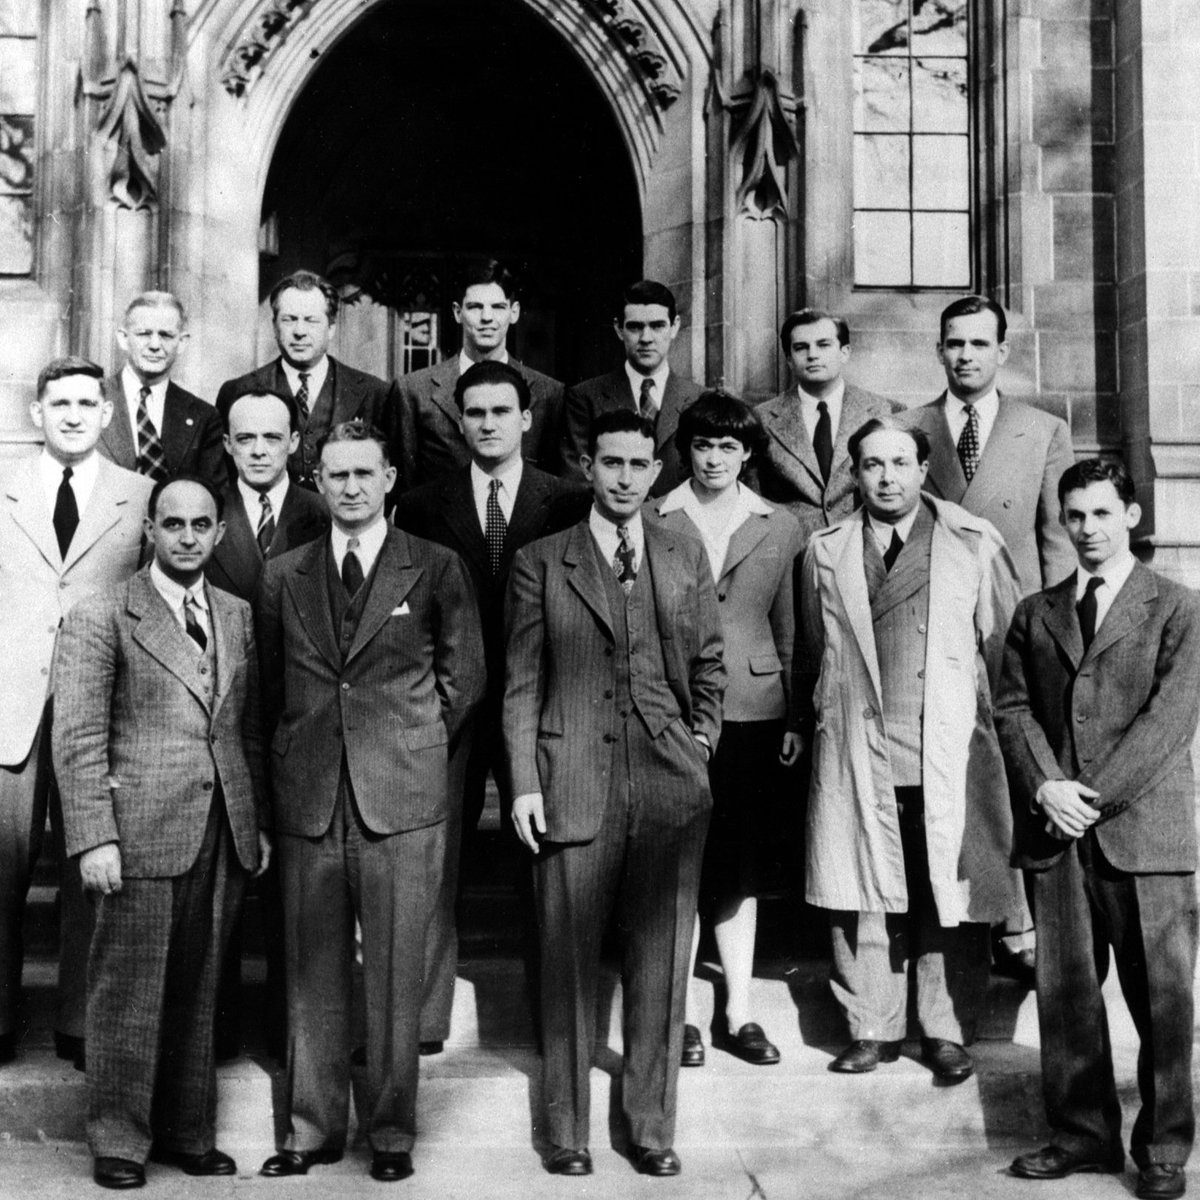 In April 1942, Enrico Fermi relocated to @UChicago Met Lab where he began planning the construction of the world's first man-made critical pile, Chicago Pile-1 (CP-1). Here he is (front row, left) with the CP-1 team. #ManhattanProject @MnhtnProjectNPS atomicheritage.org/history/chicag…